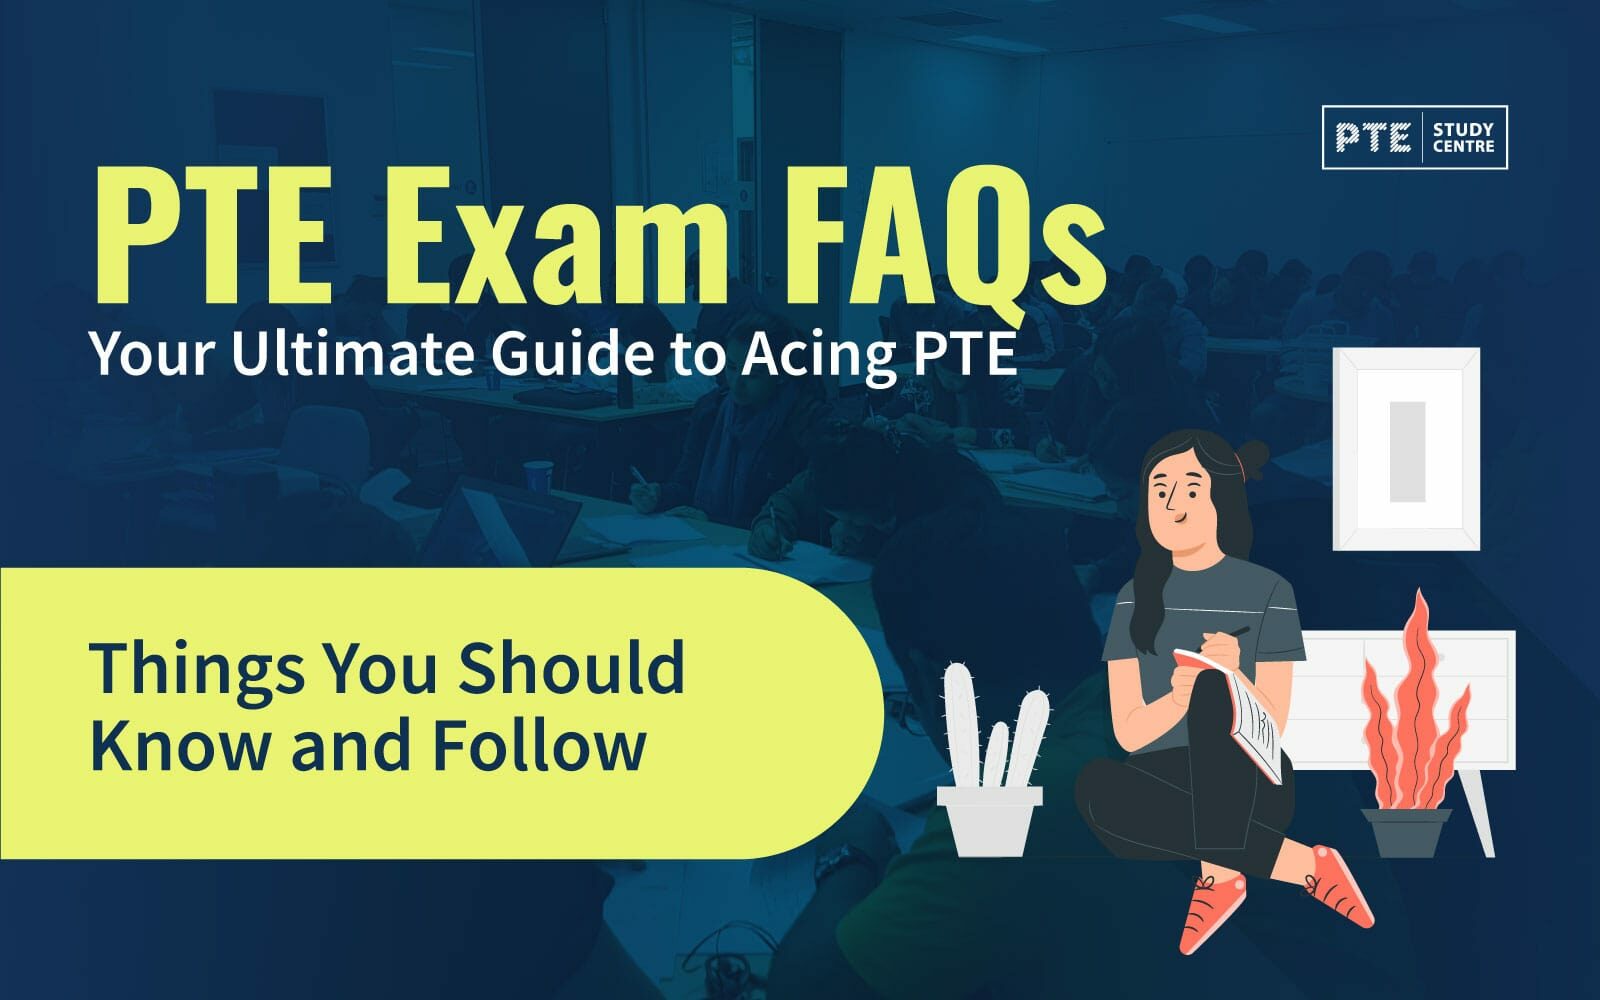 PTE Exam FAQs: Your Ultimate Guide to Acing PTE